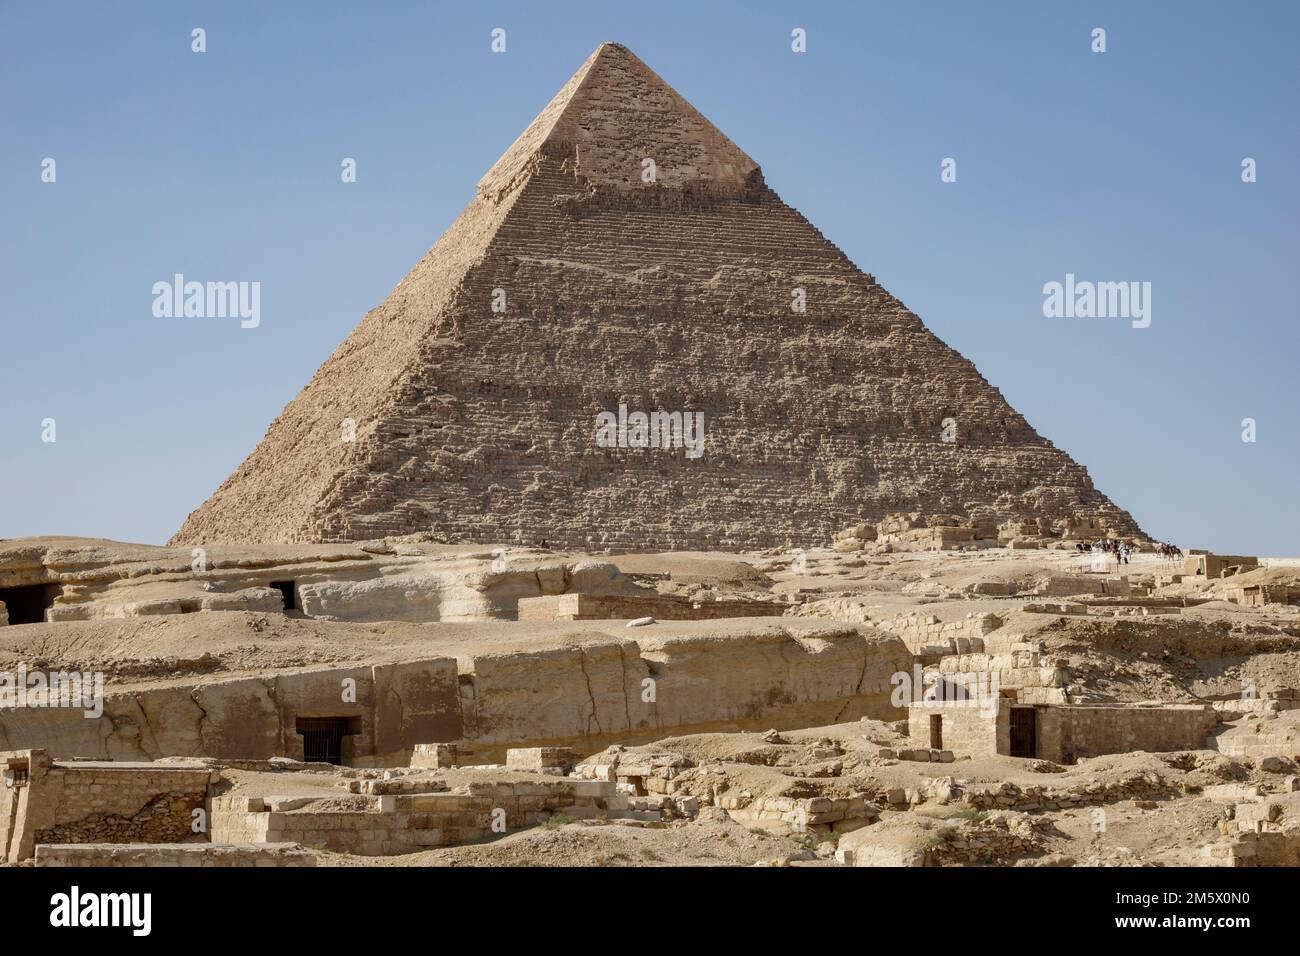 View of Khafre Pyramid at the Giza Pyramids and Sphinx, Cairo, Egypt Stock Photo